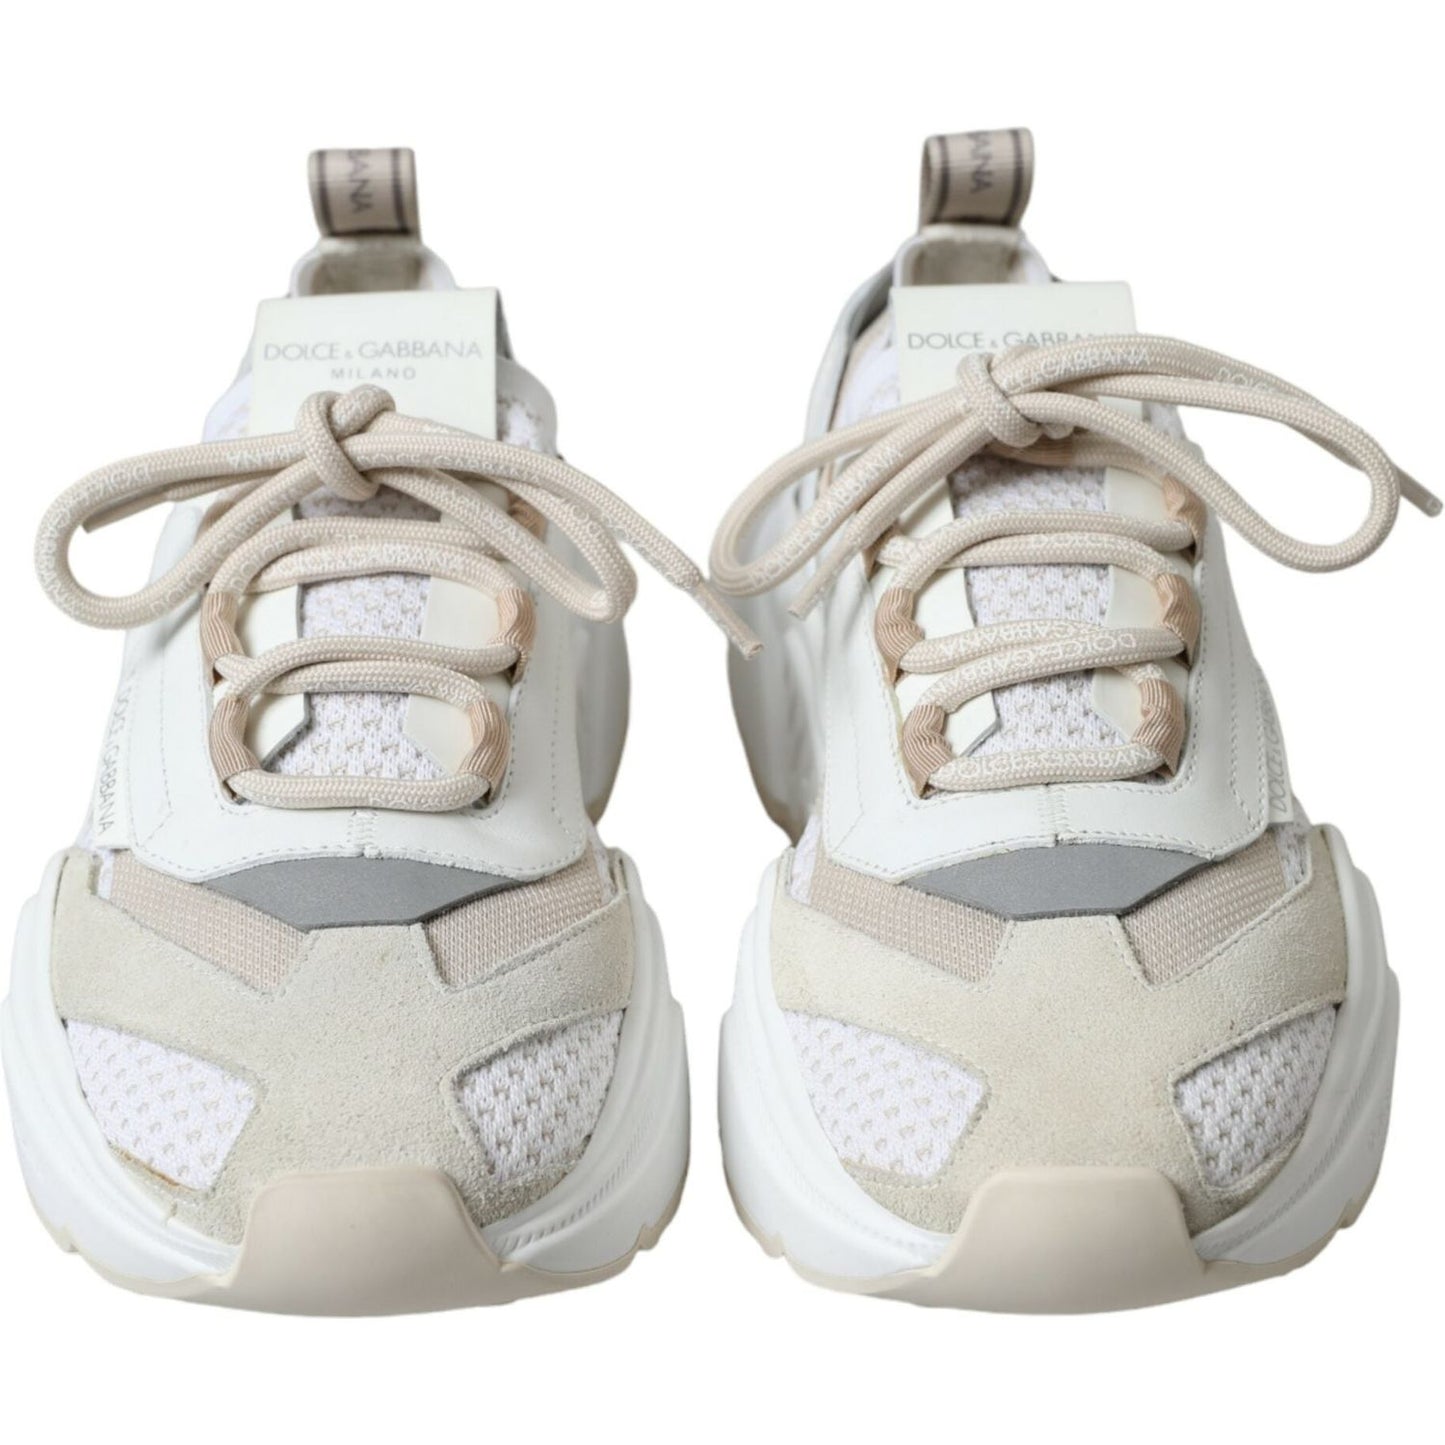 Dolce & Gabbana Chic Colorful Daymaster Sneakers beige-white-daymaster-low-top-leather-sneakers-shoes